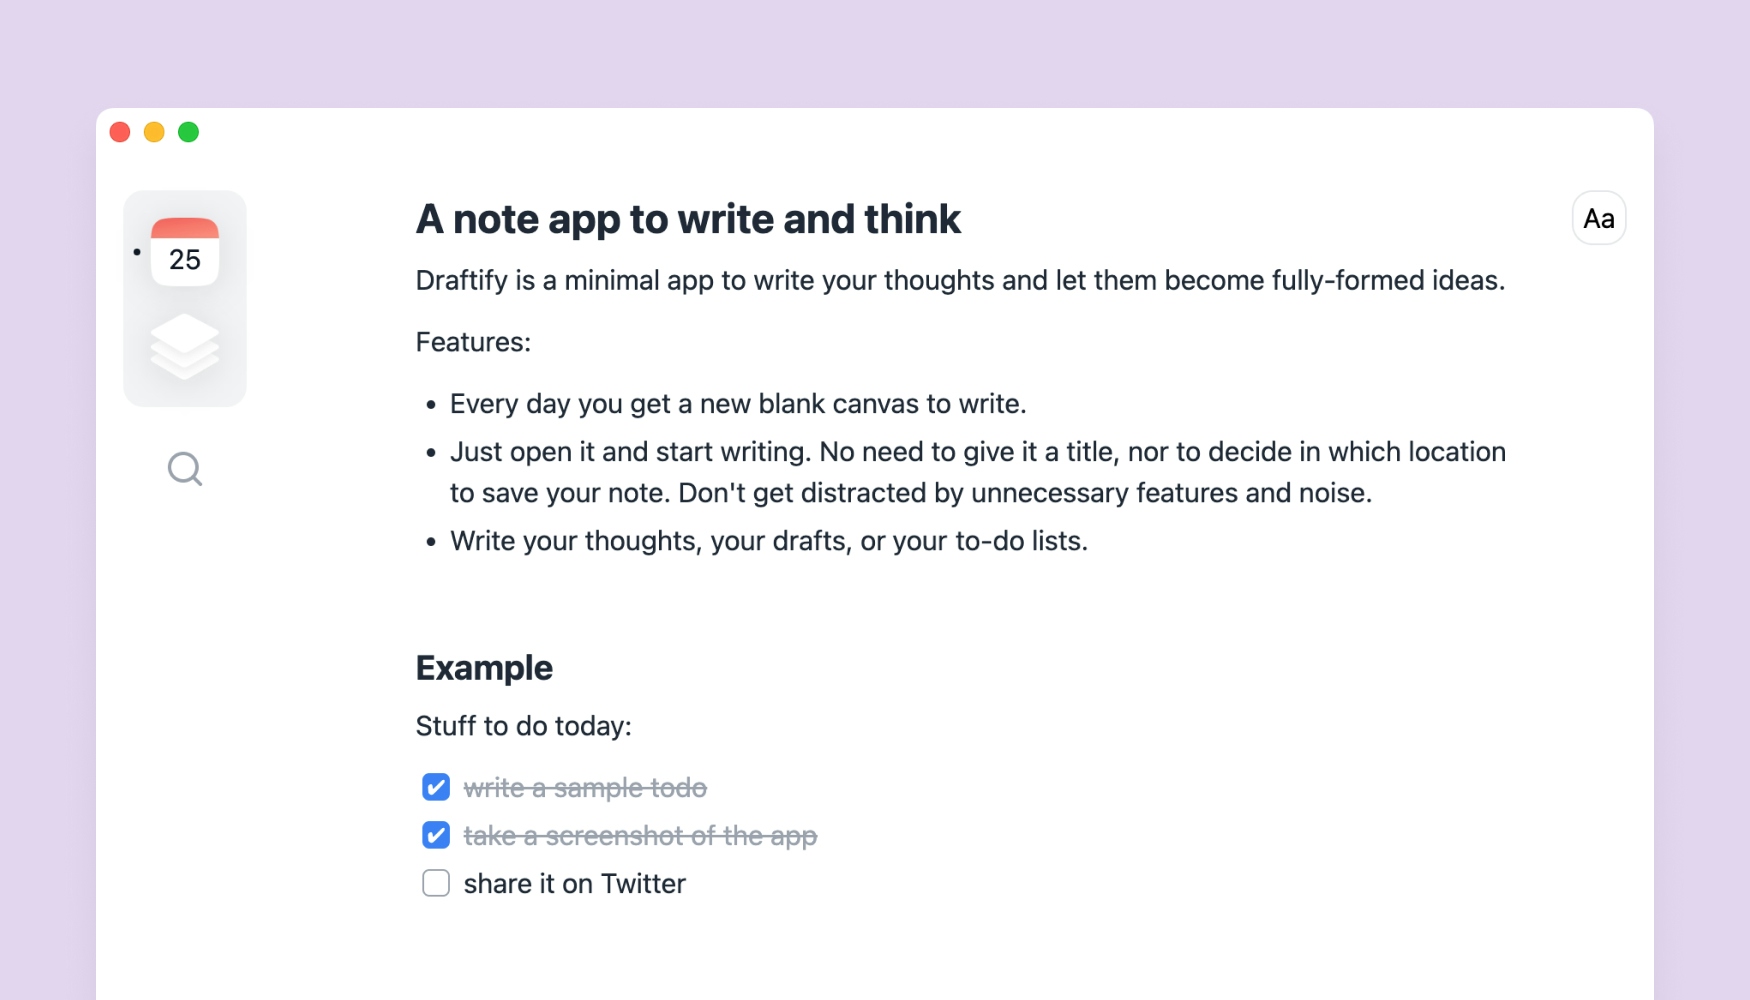 Draftify App: Mindful Writing and Thinking Note App